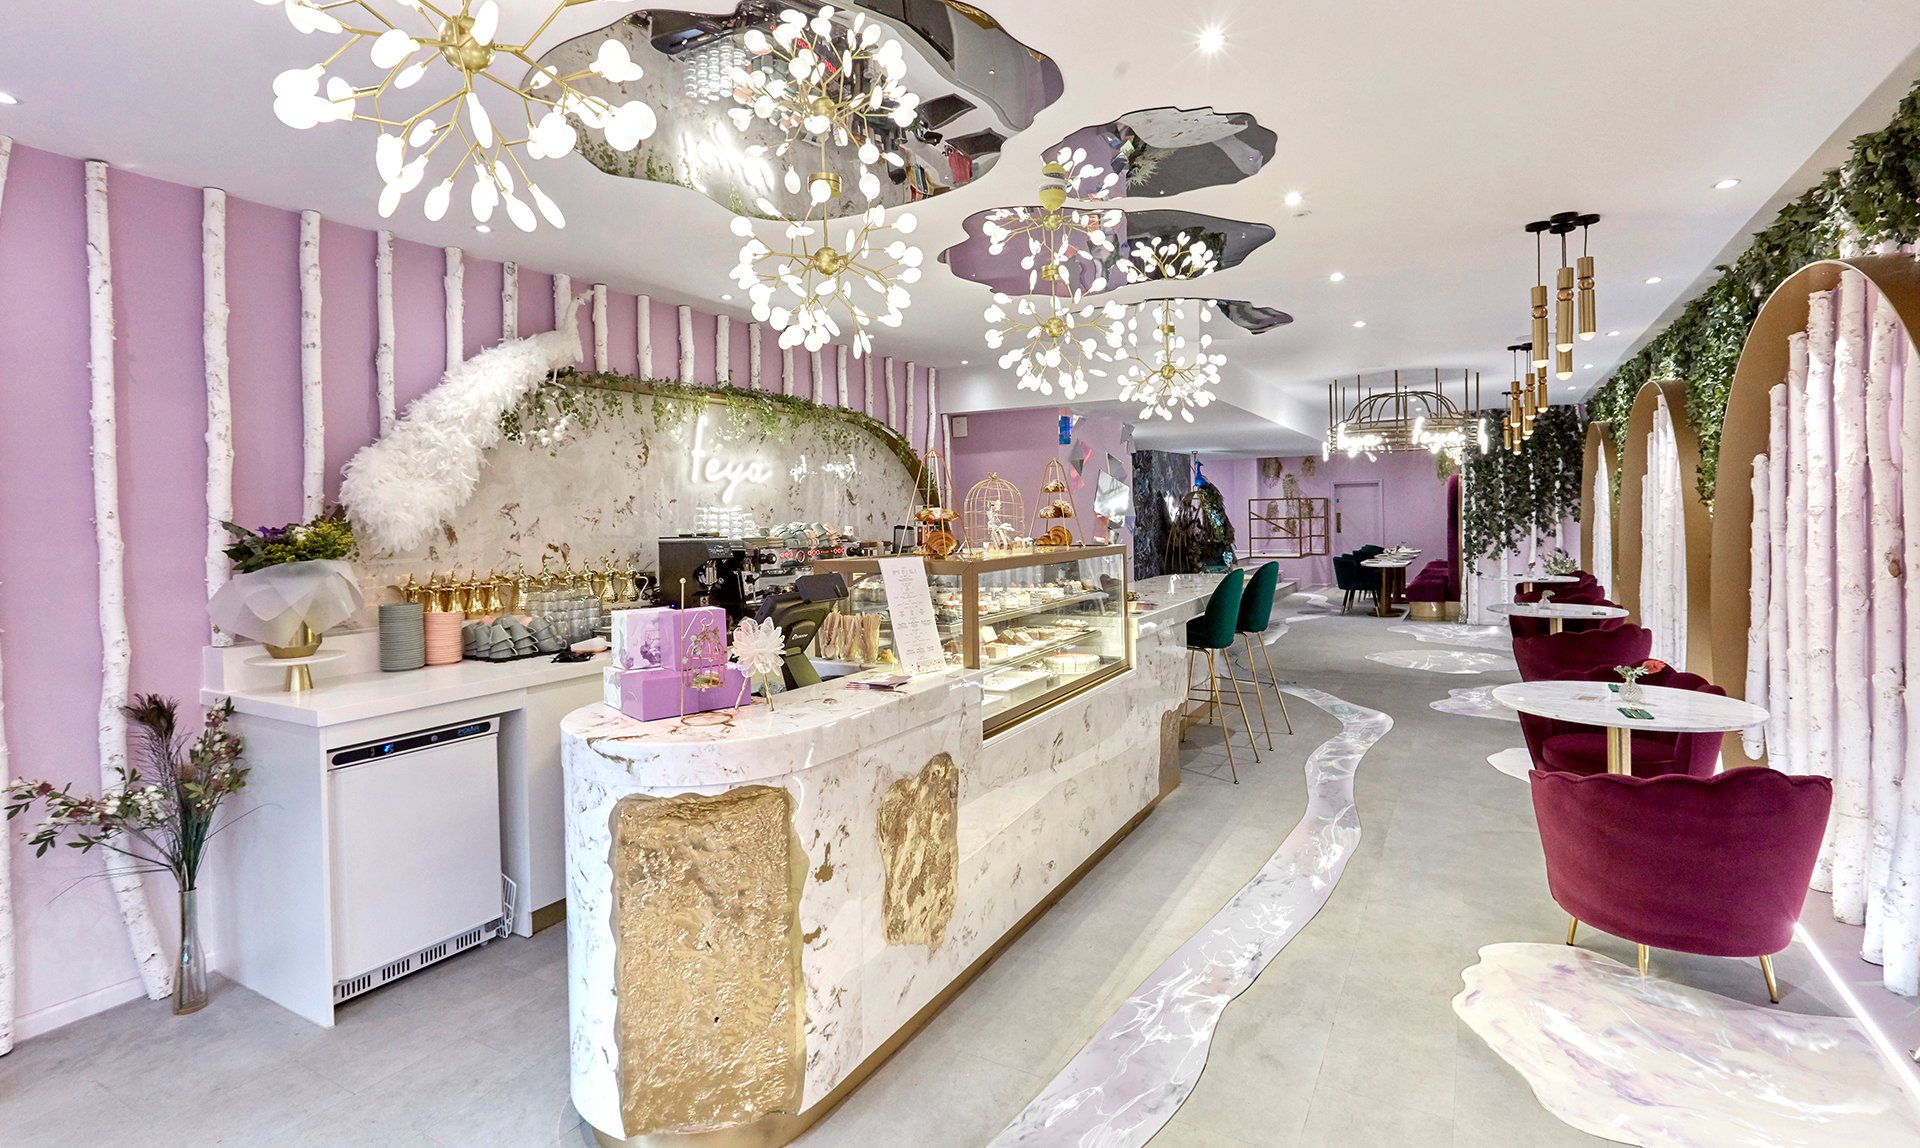 Trendy cafe and cake shop in central London with marble counter